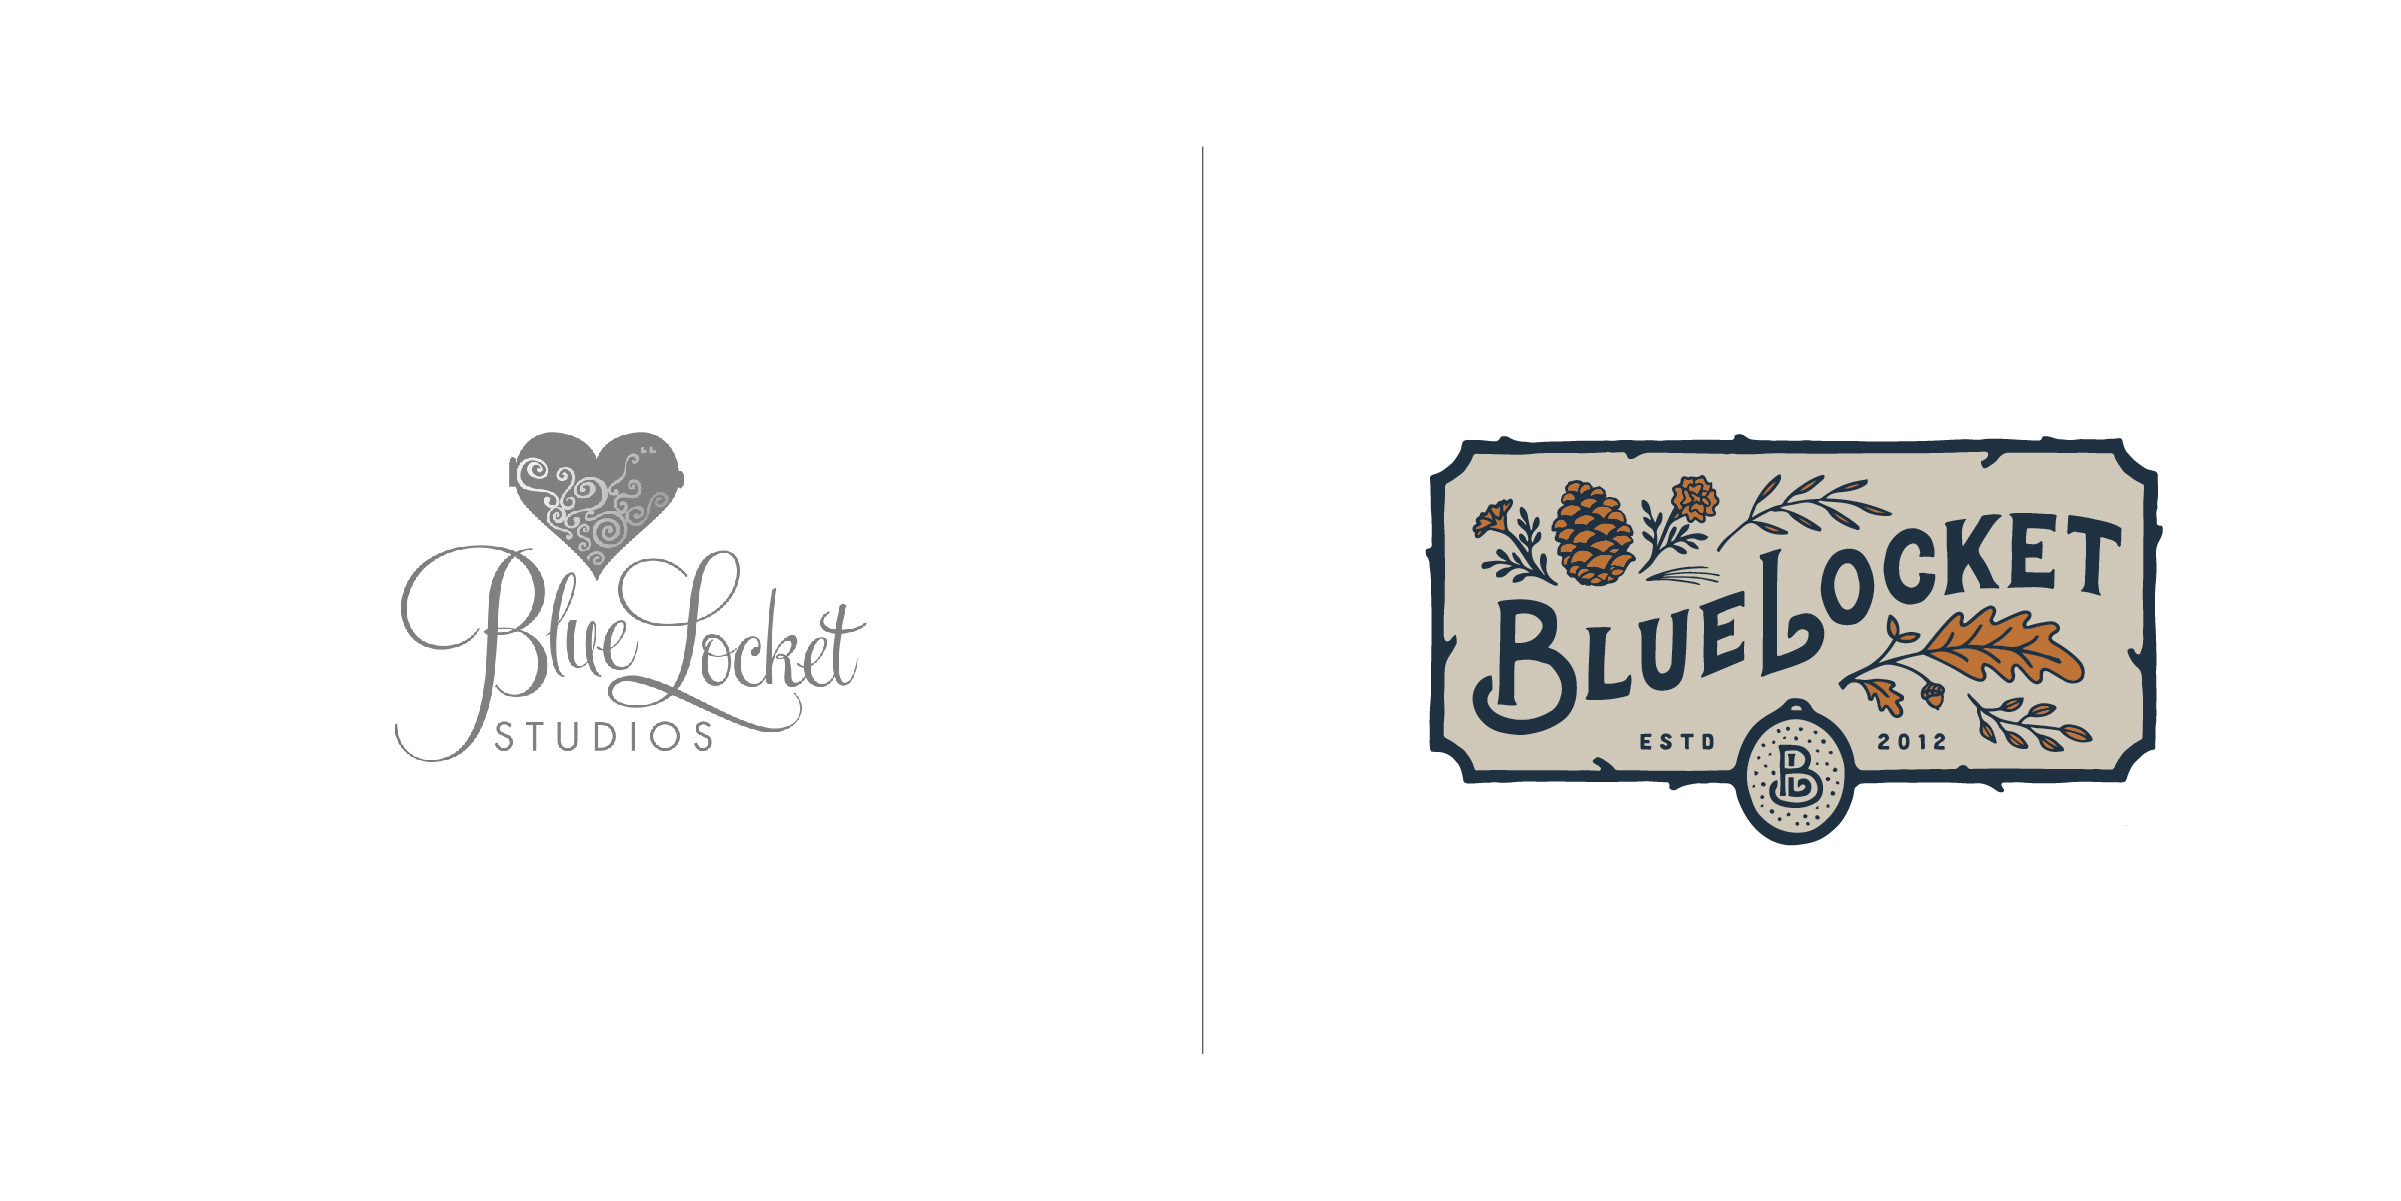  The client — Blue Locket is a talented wedding and lifestyle photography business in New England.  The goal — In a sea of logo monotony, Blue Locket needed to stand apart in the industry. We hand crafted a truly original design that authentically ar